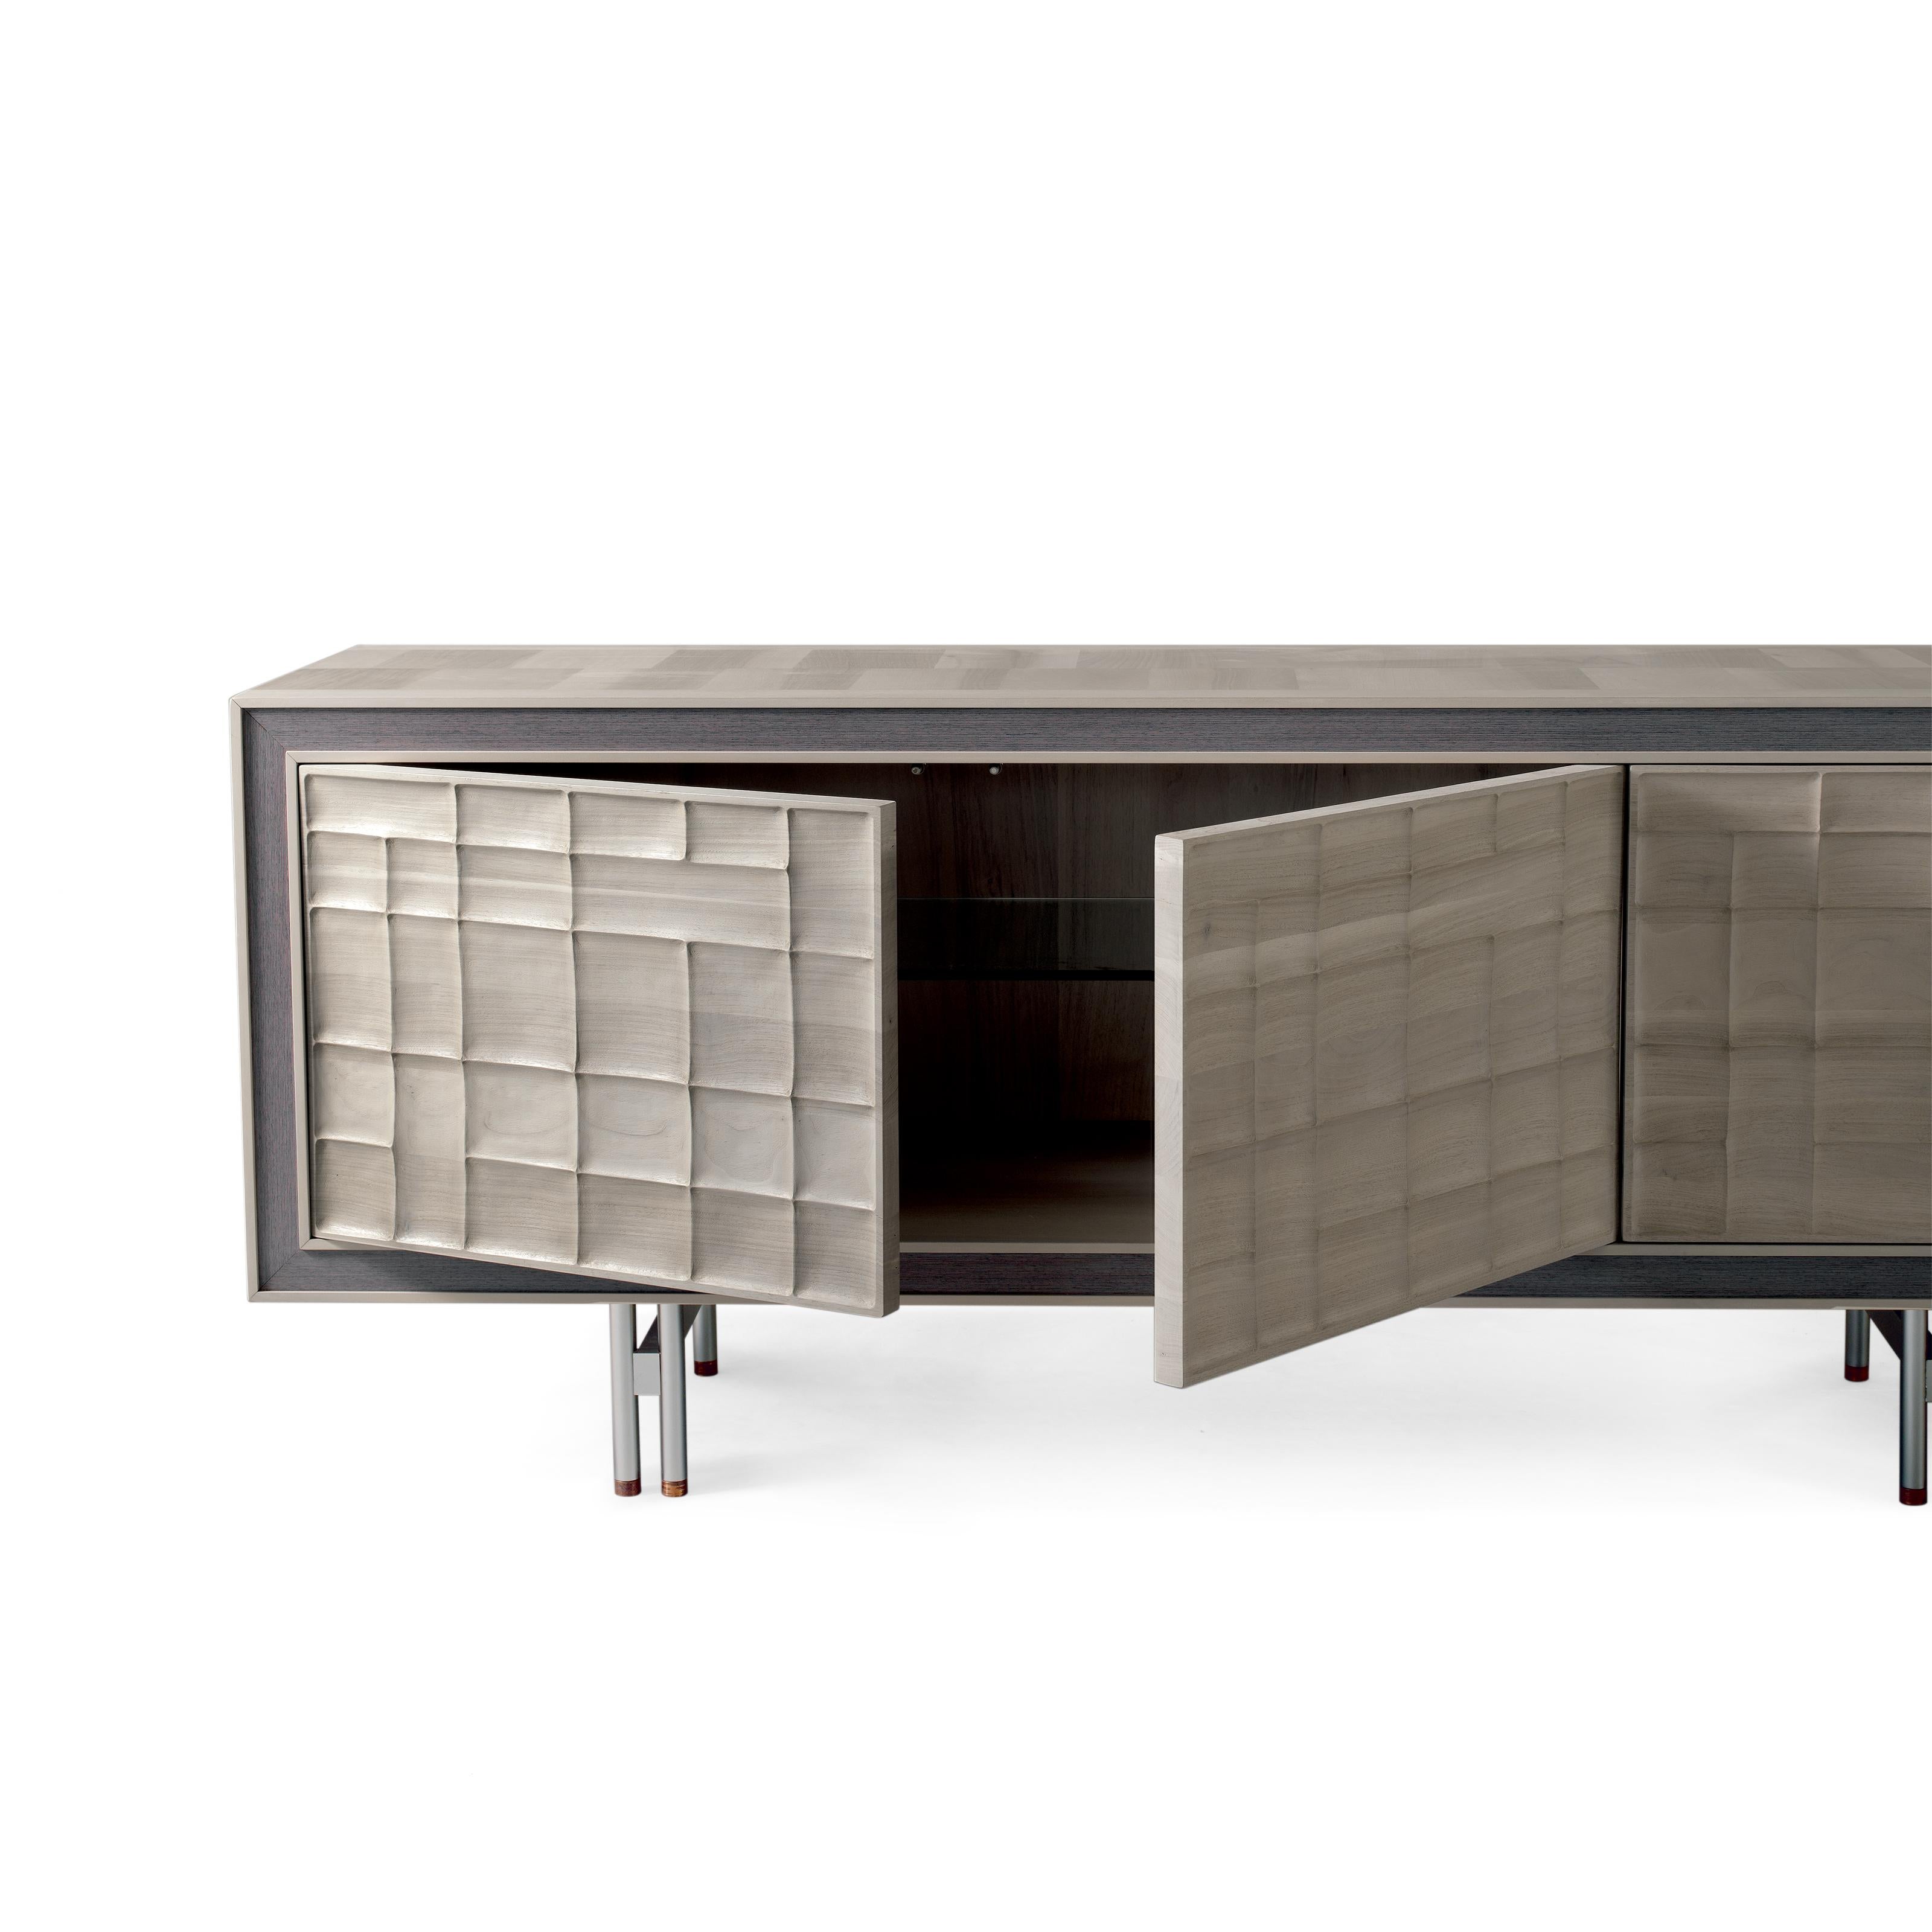 A stunning sideboard that combines Fine Italian design with exceptional craftsmanship. Made of premium solid walnut in natural oil finish, it’s a timeless piece perfect for elegant and contemporary interior design. It comes with 3 doors and internal